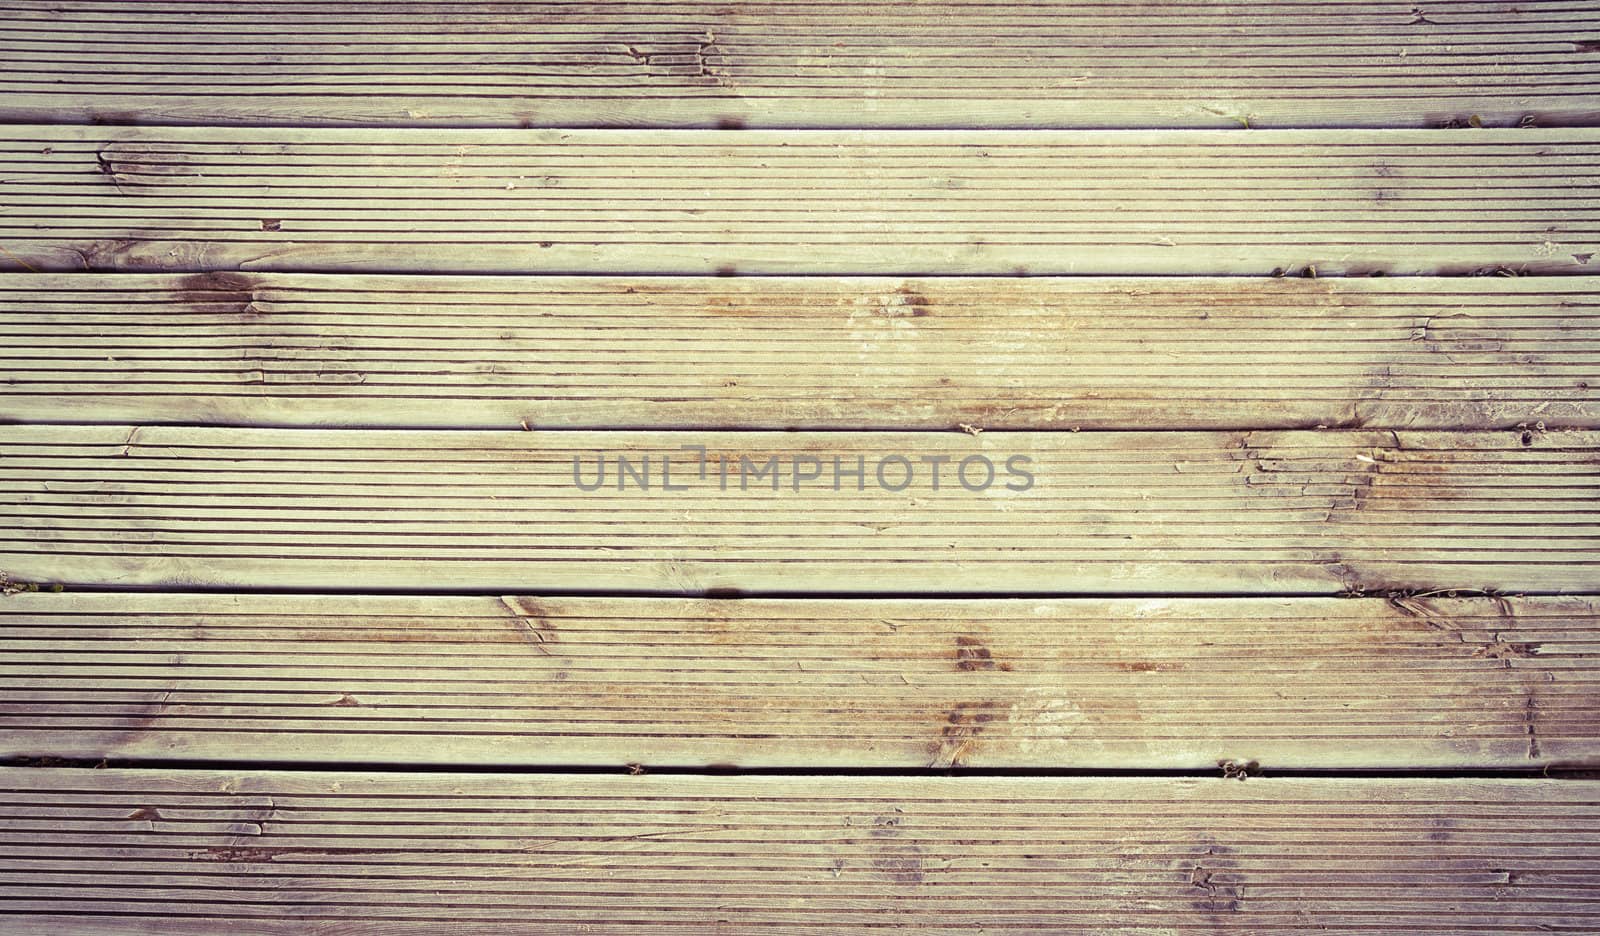 Vintage wood texture background by doble.d